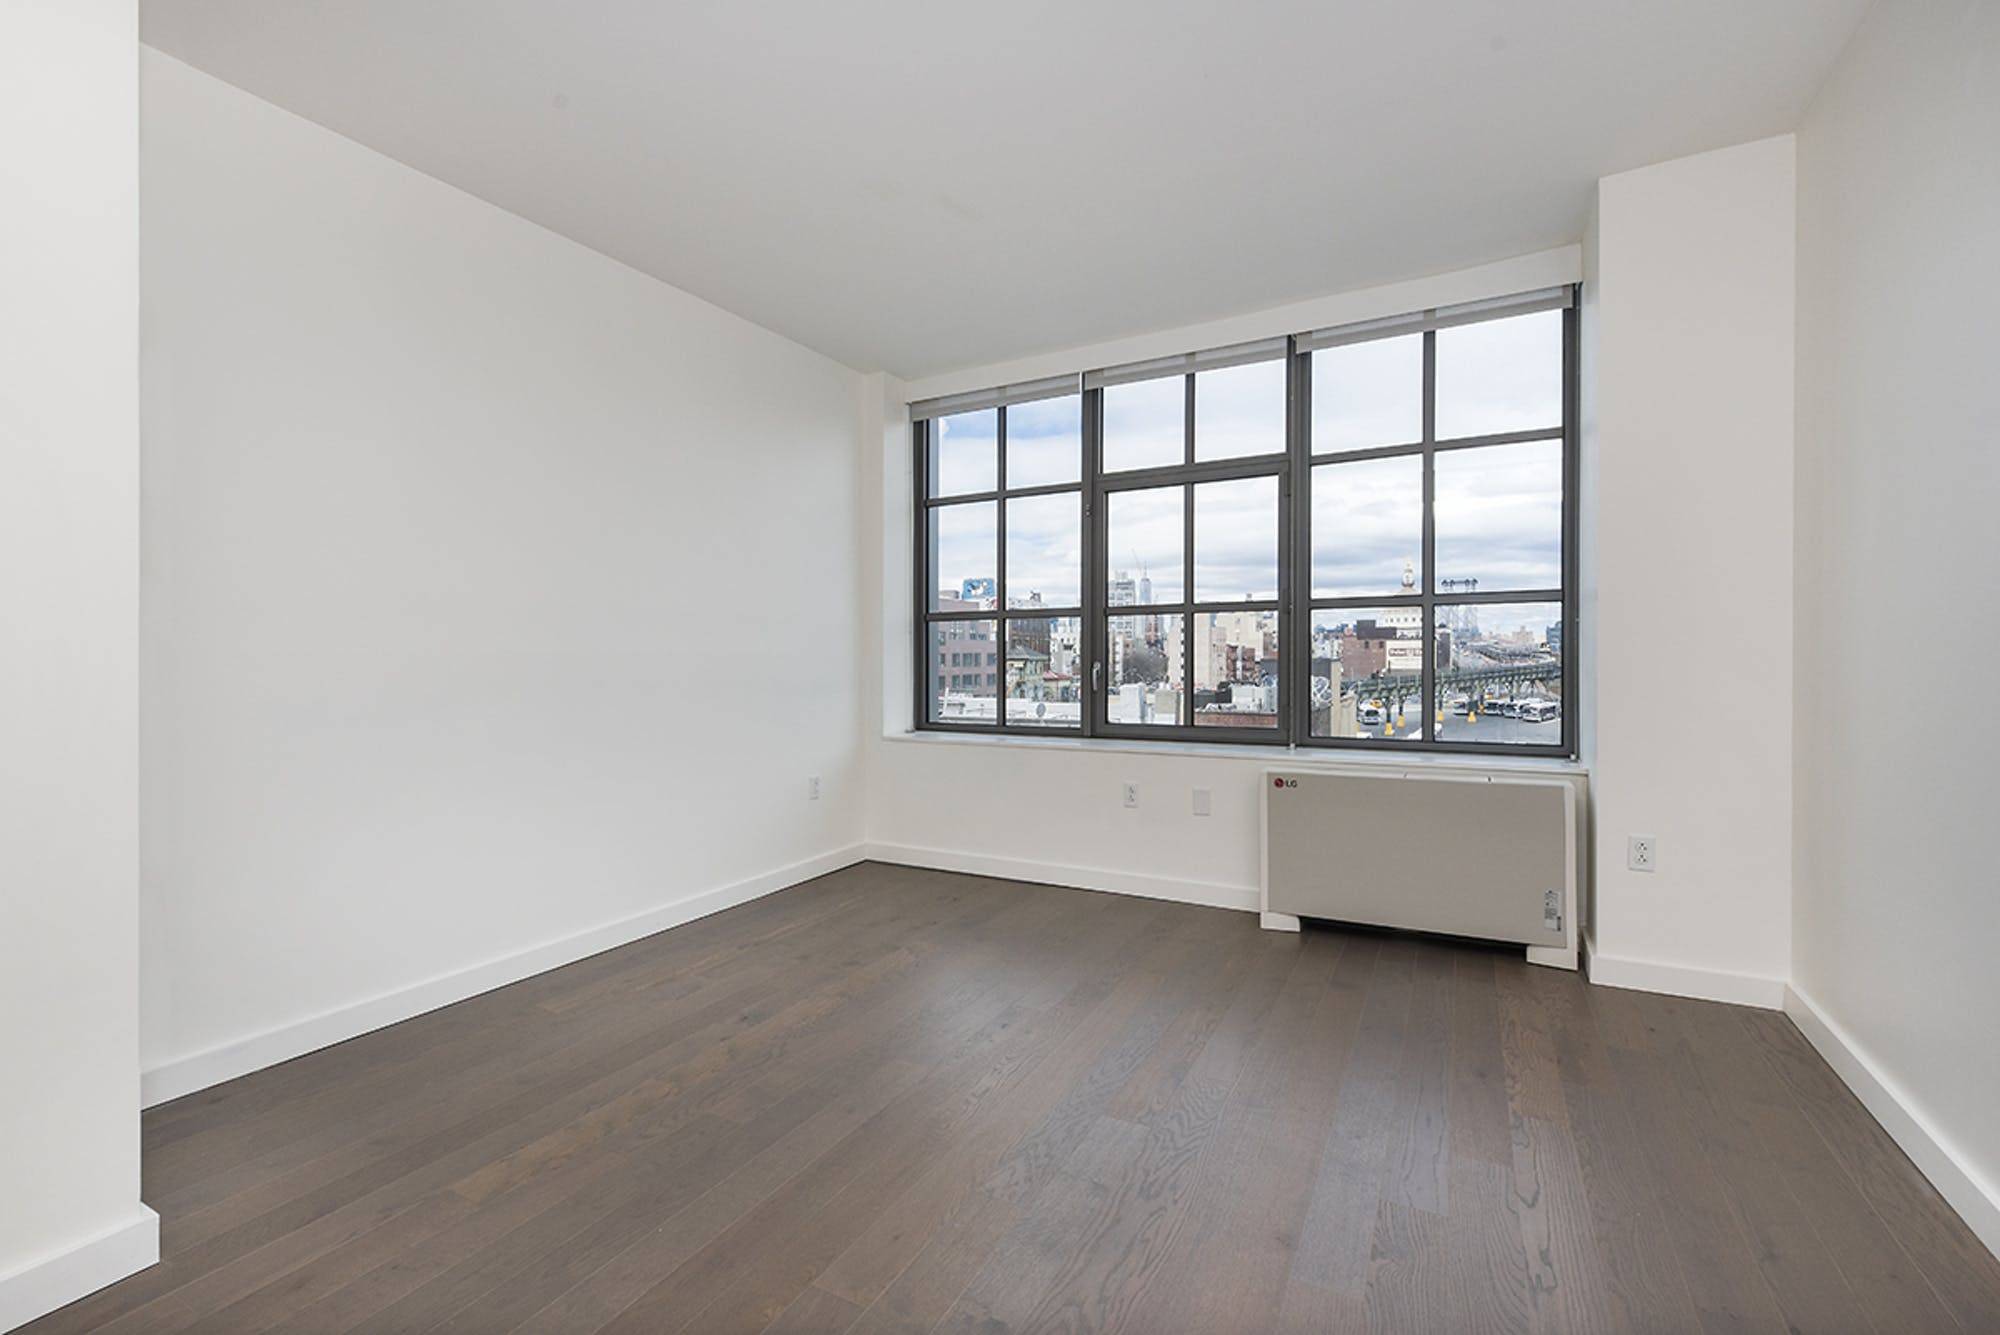 Rent Stabilized 1. 5 Month's Free 3333 net, 3750 gross Virtual Tour available upon request Welcome to The Williams Formally the site of the Spilkes Bakery, this newly constructed luxury ...